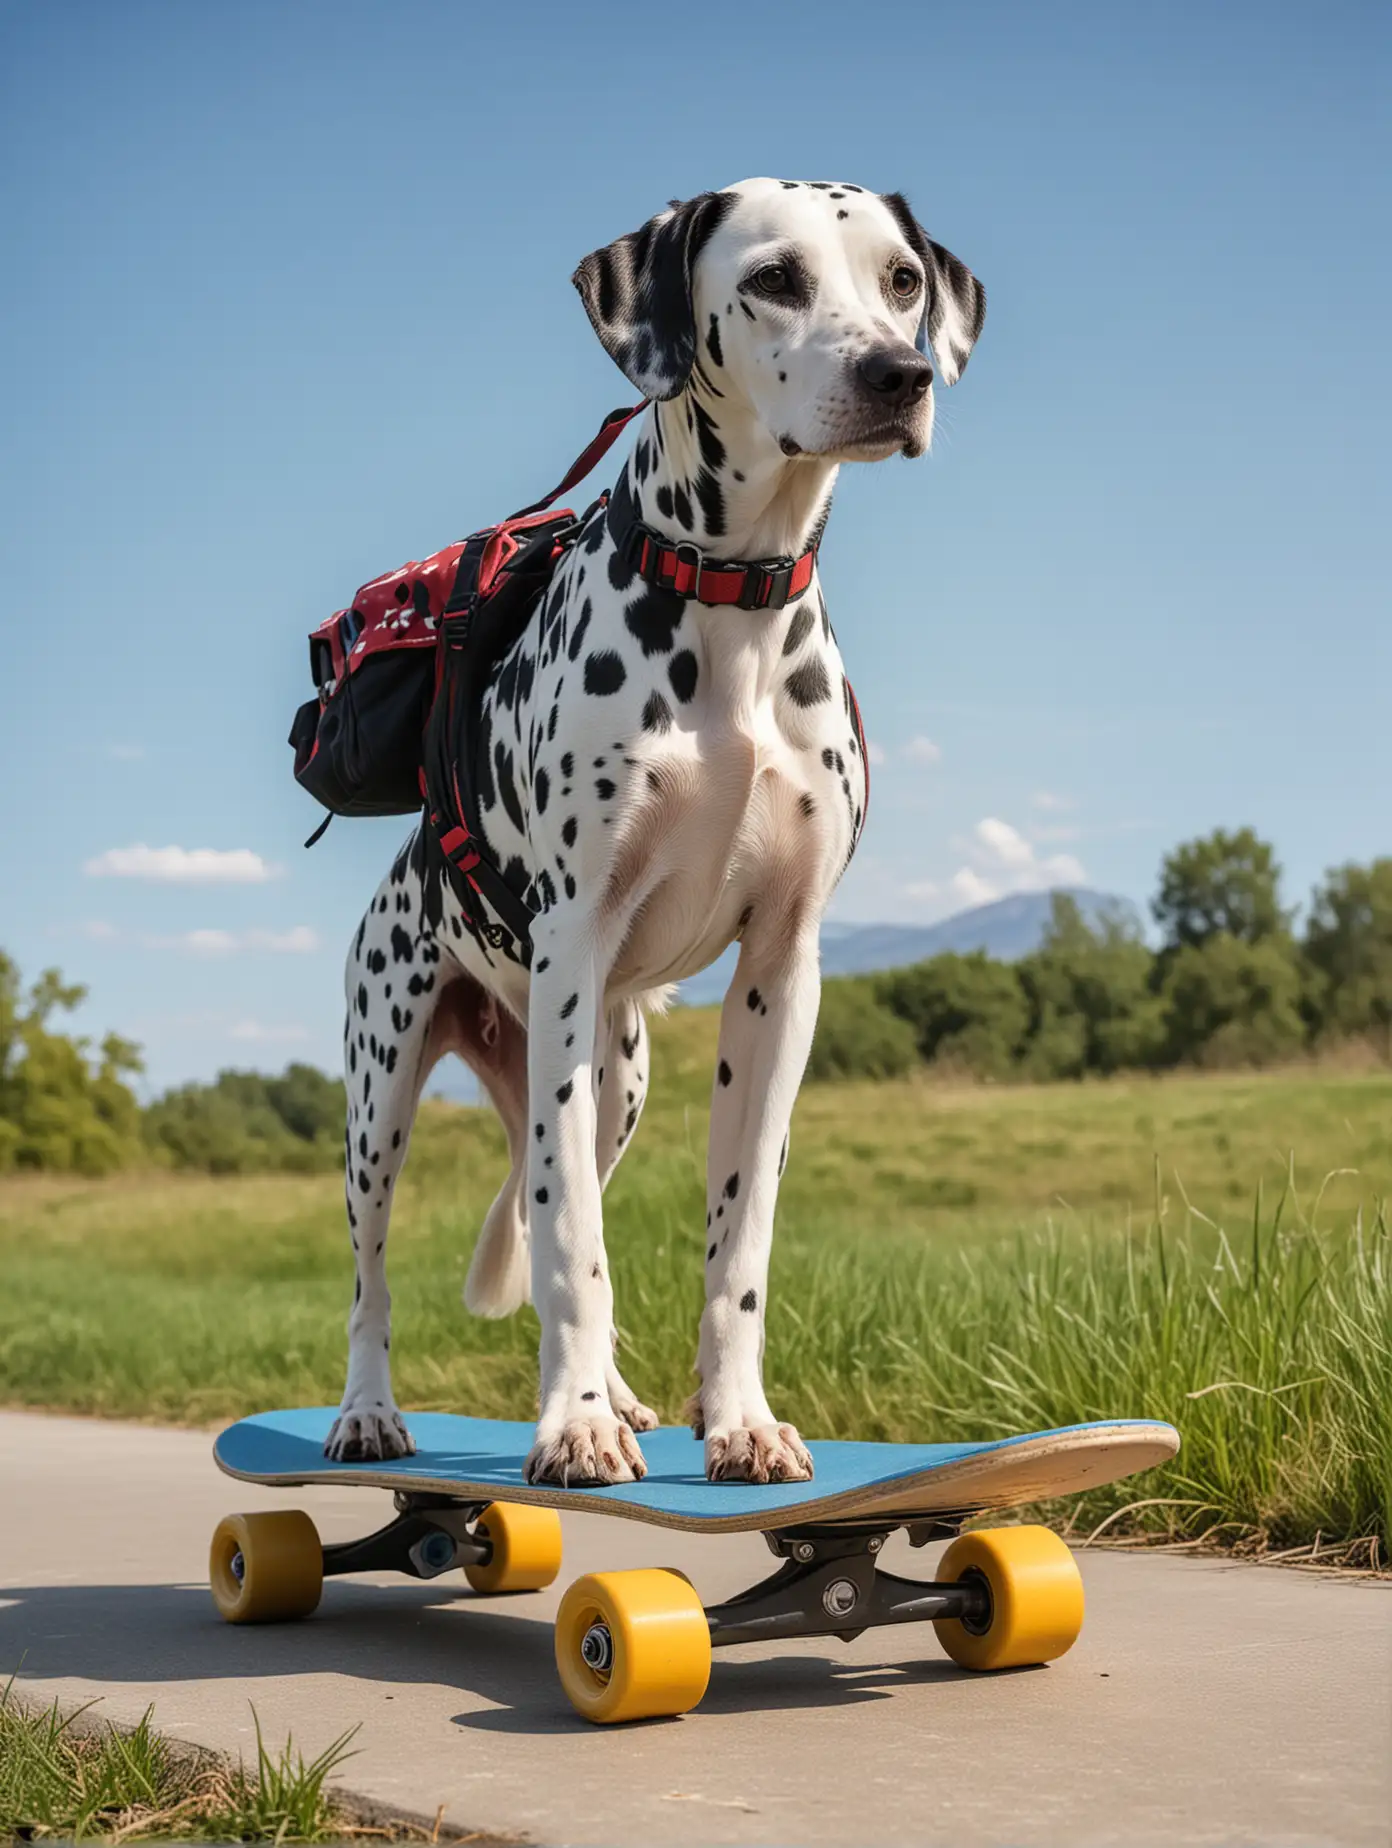 Dalmatian  on skate board, rucksack, blue sky and 
grass in background